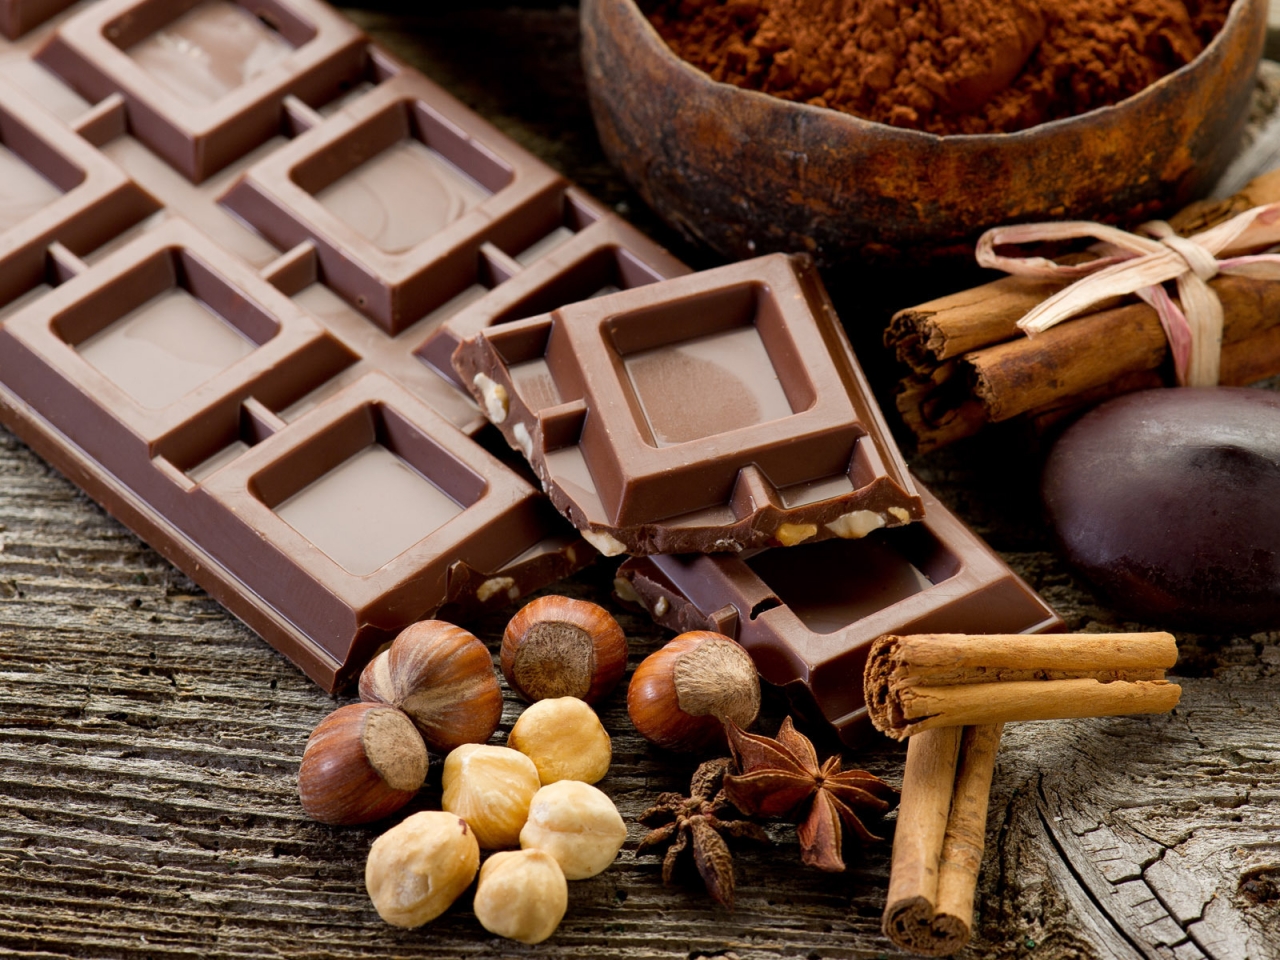 Chocolate and Cinnamon and Nuts for 1280 x 960 resolution